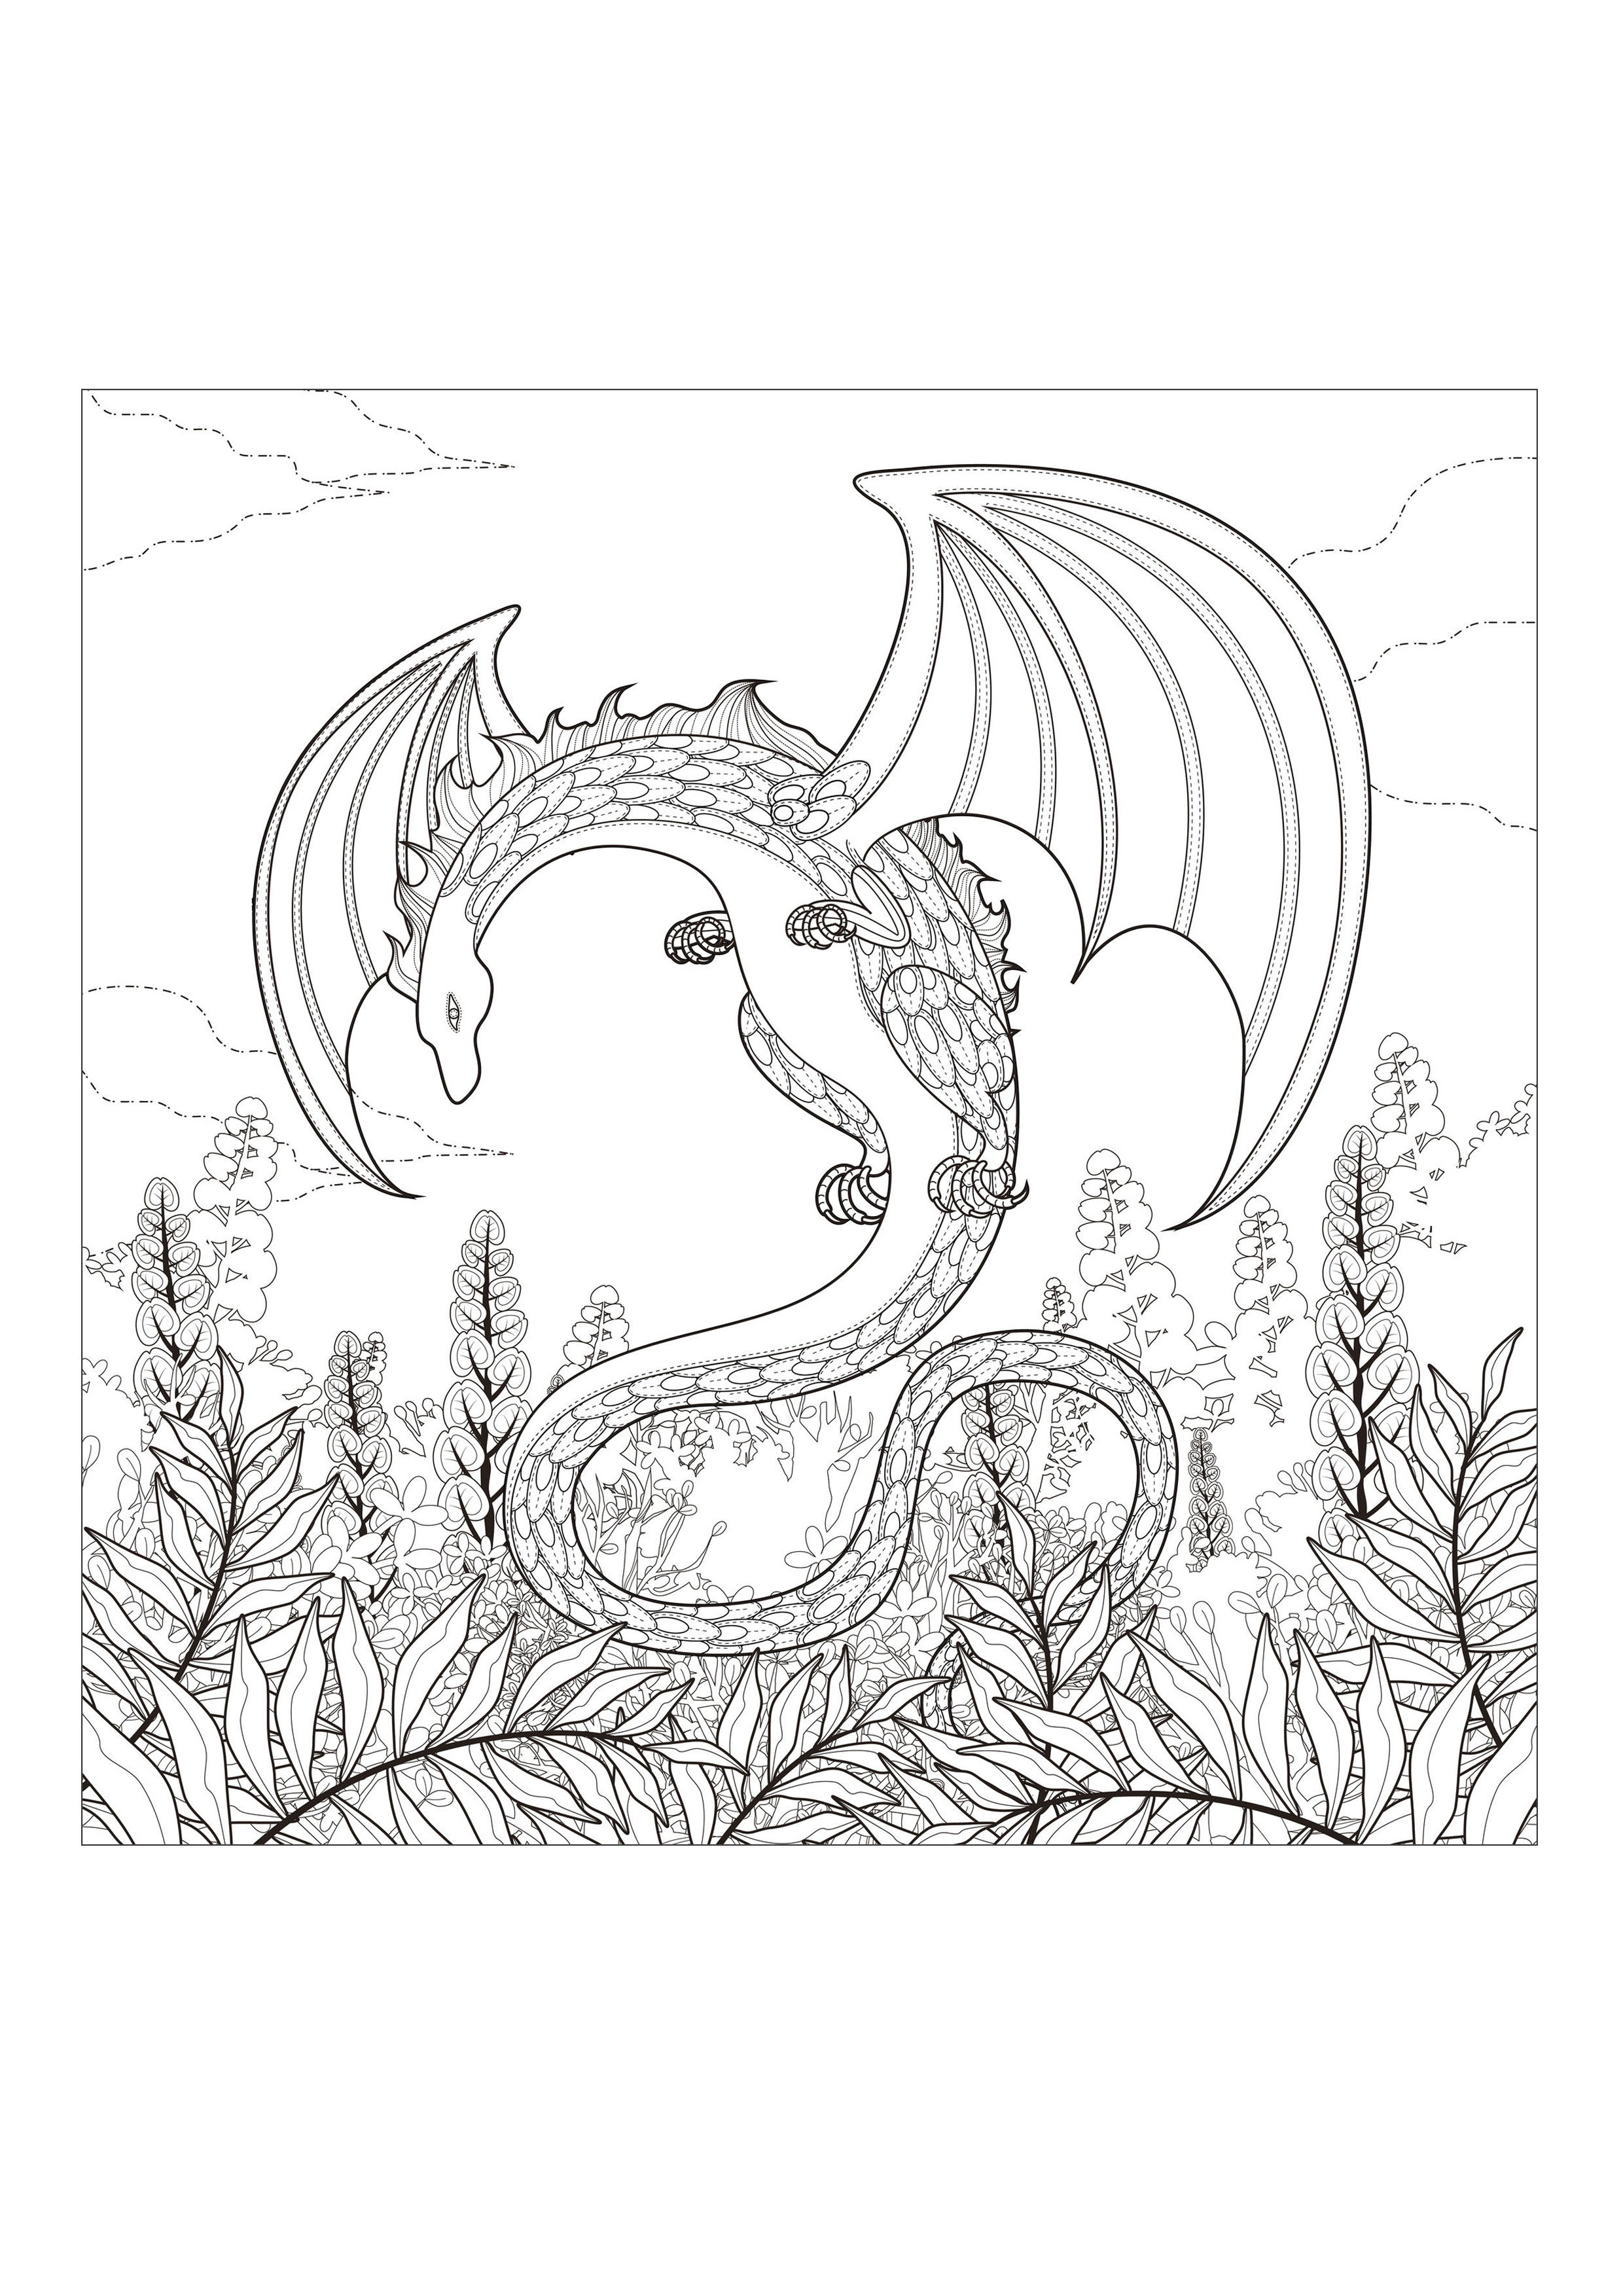 Monster - Coloring Pages for Adults